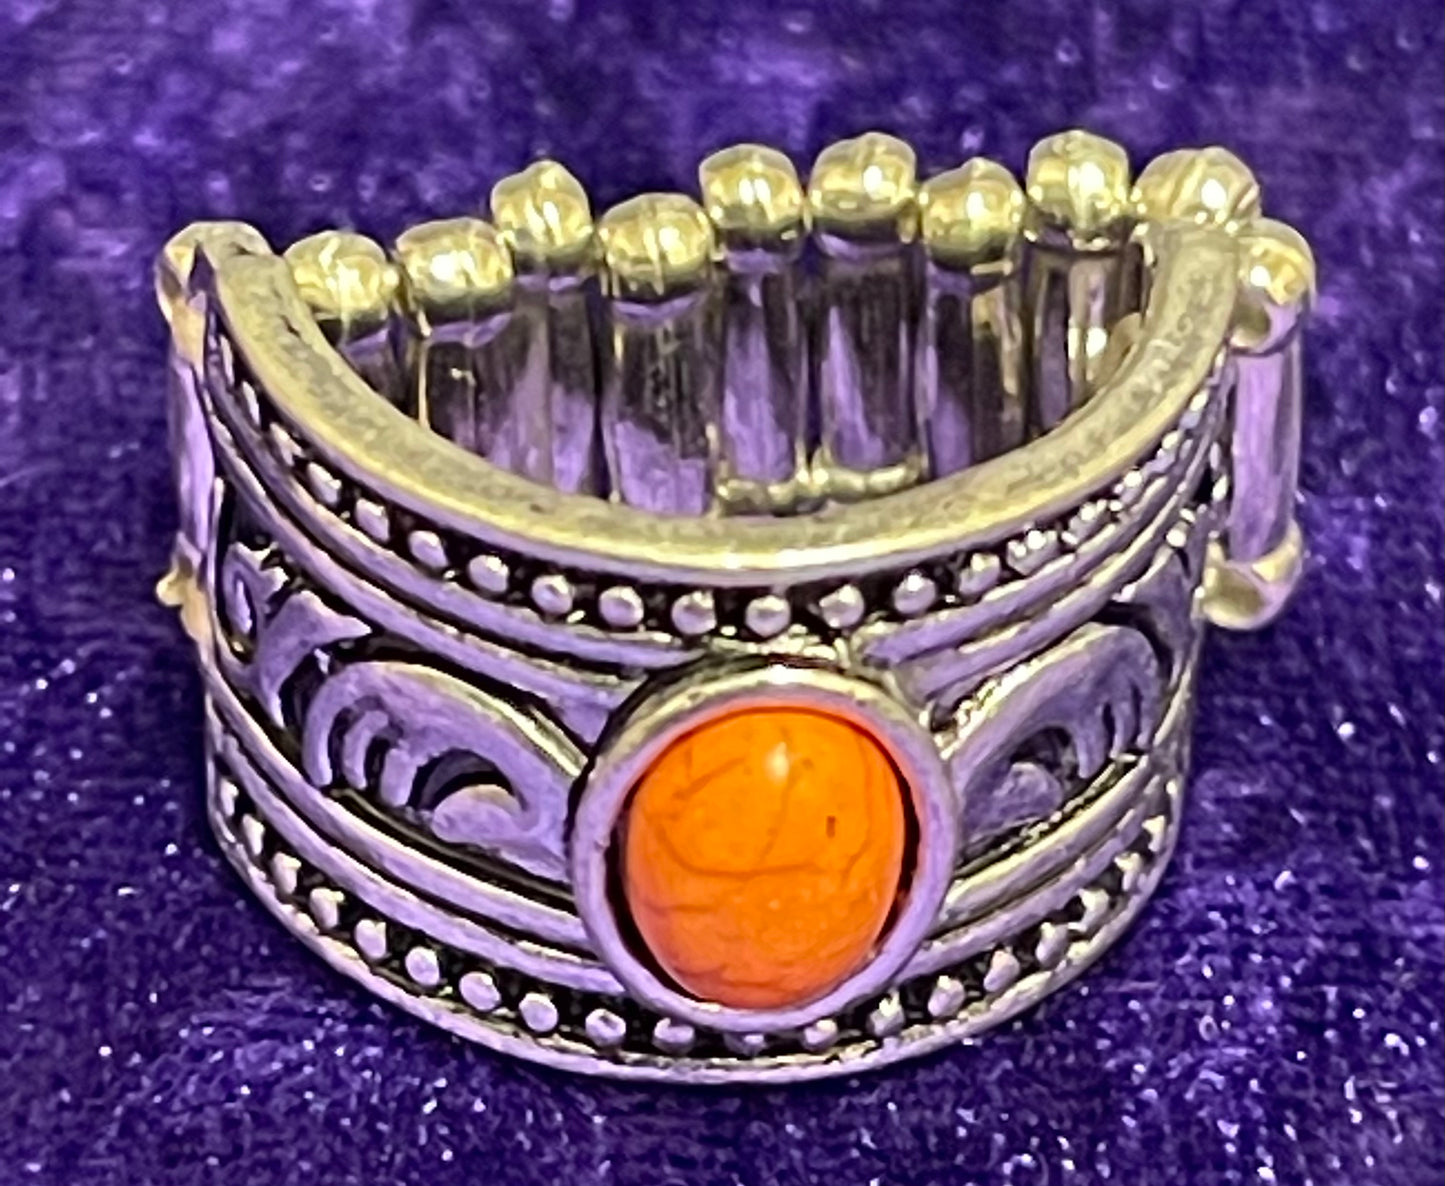 Silver with Orange Stone Ring